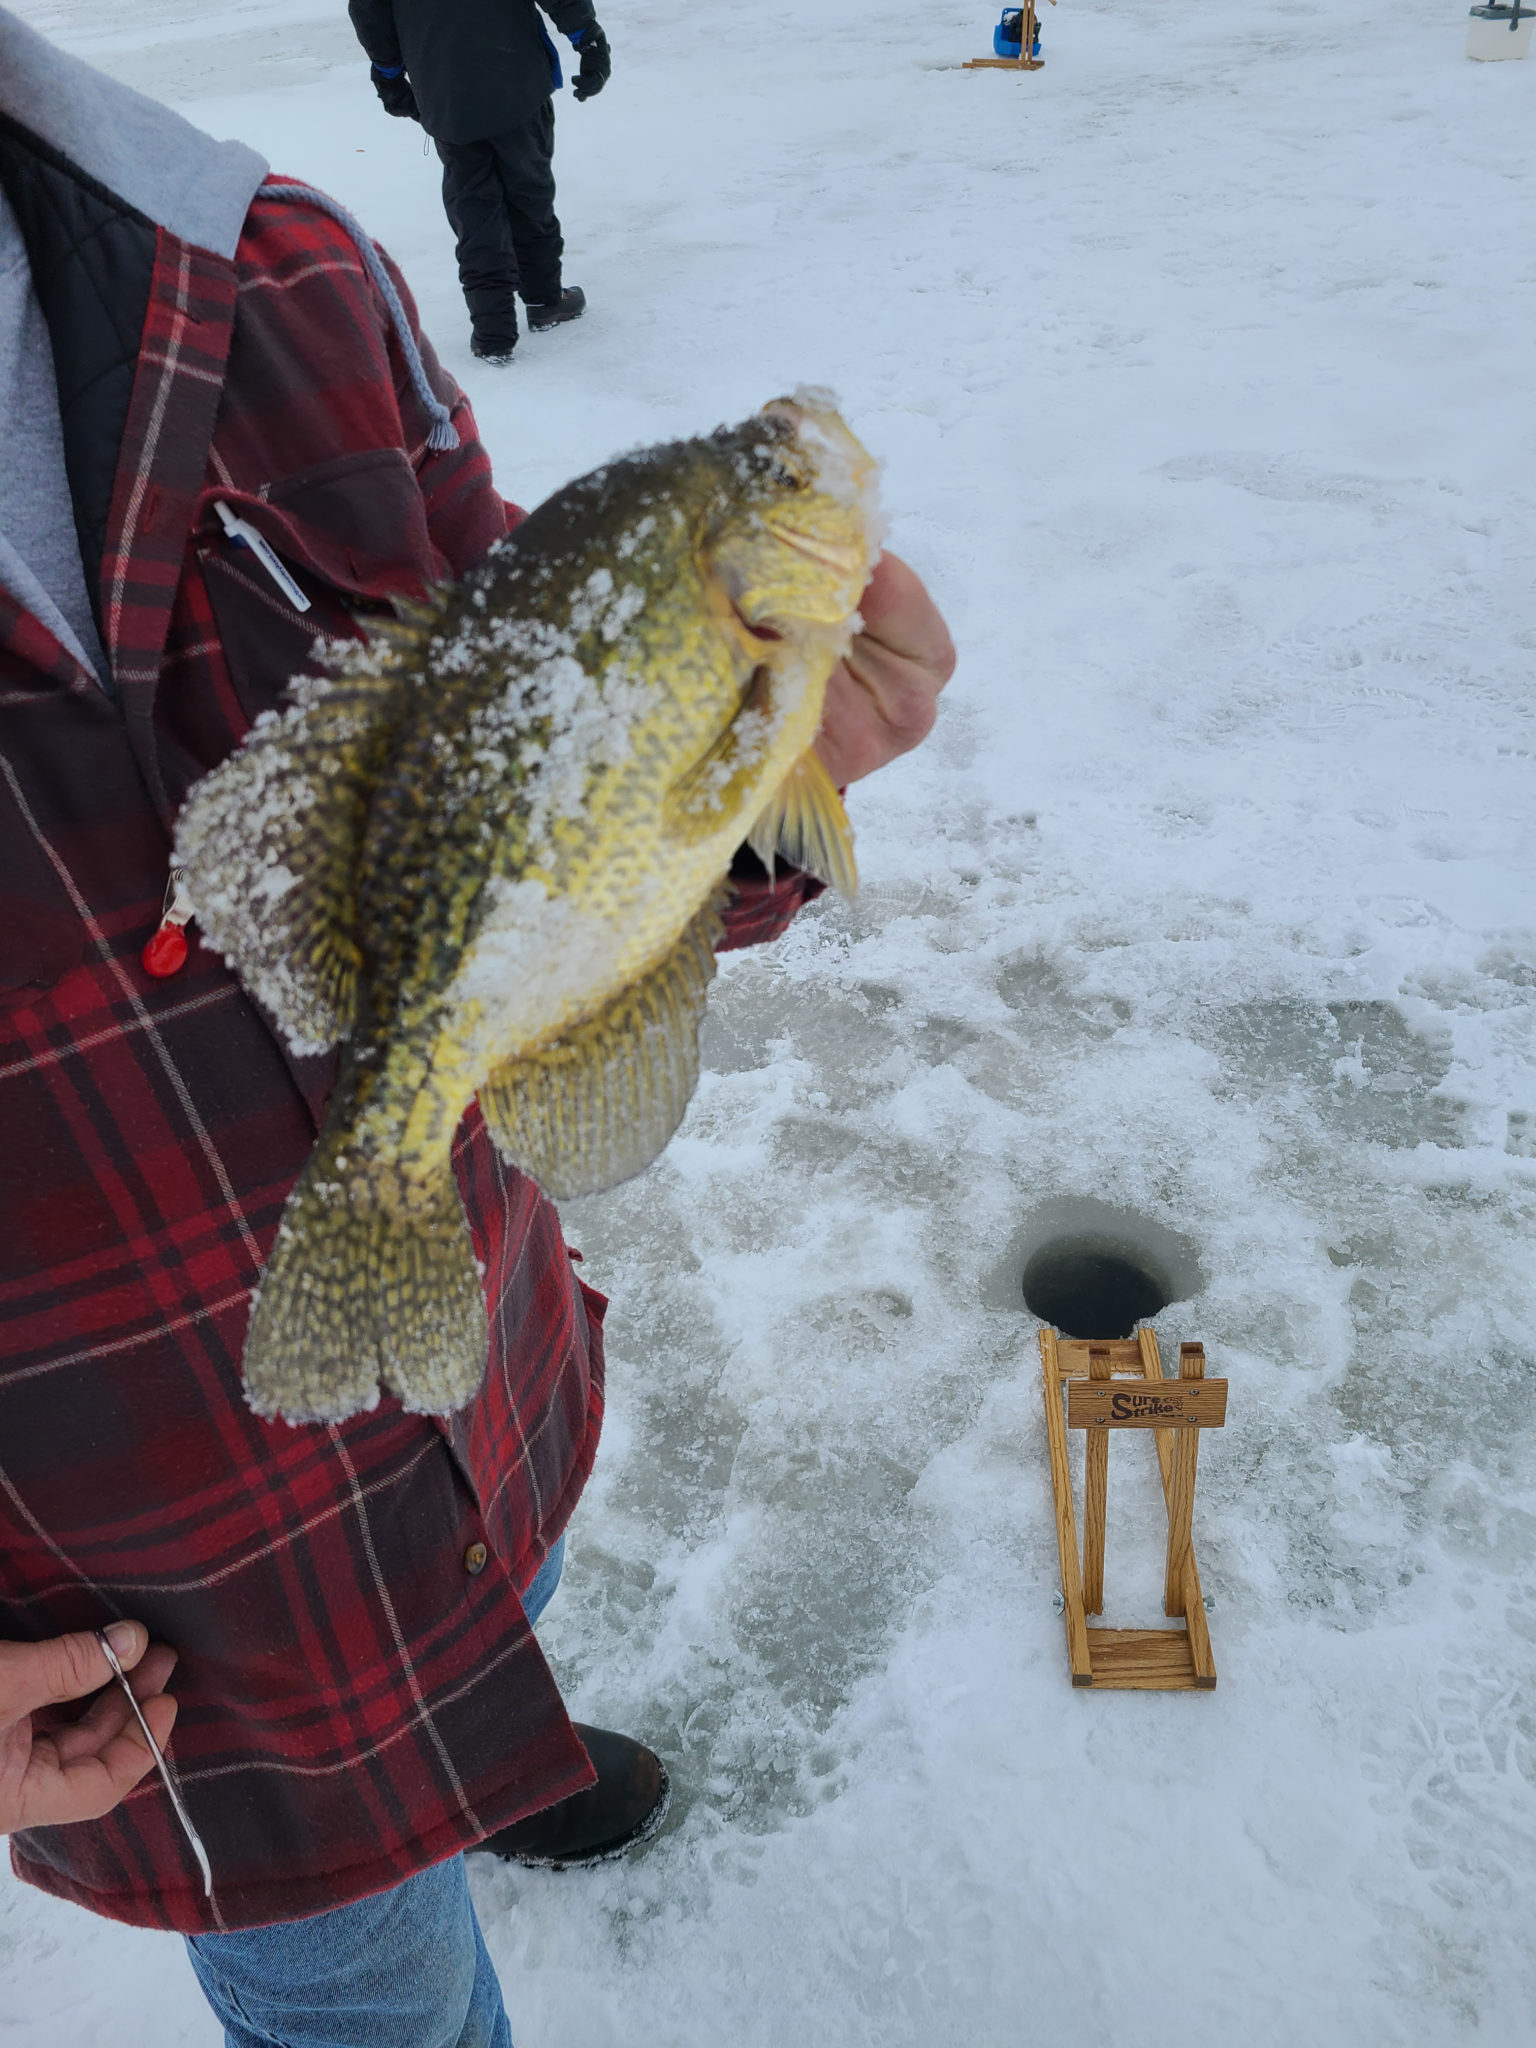 Fishing Report: January Thaw Turns On the Ice Fishing Bite